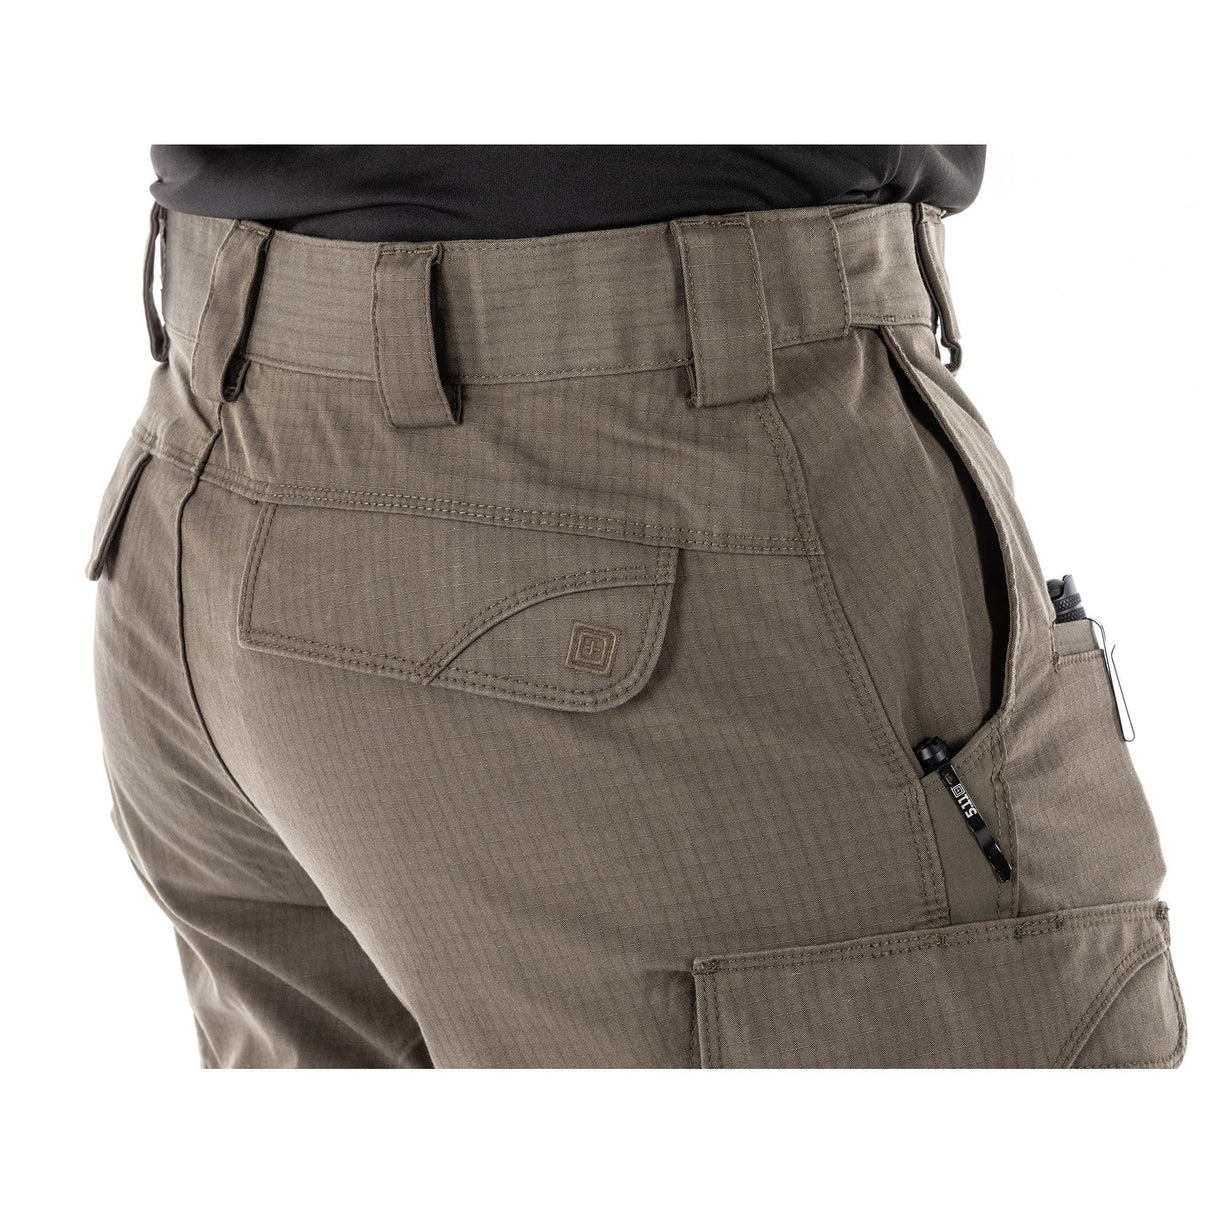 STRYKE® PANT TUNDRA - 5.11 Tactical Finland Store